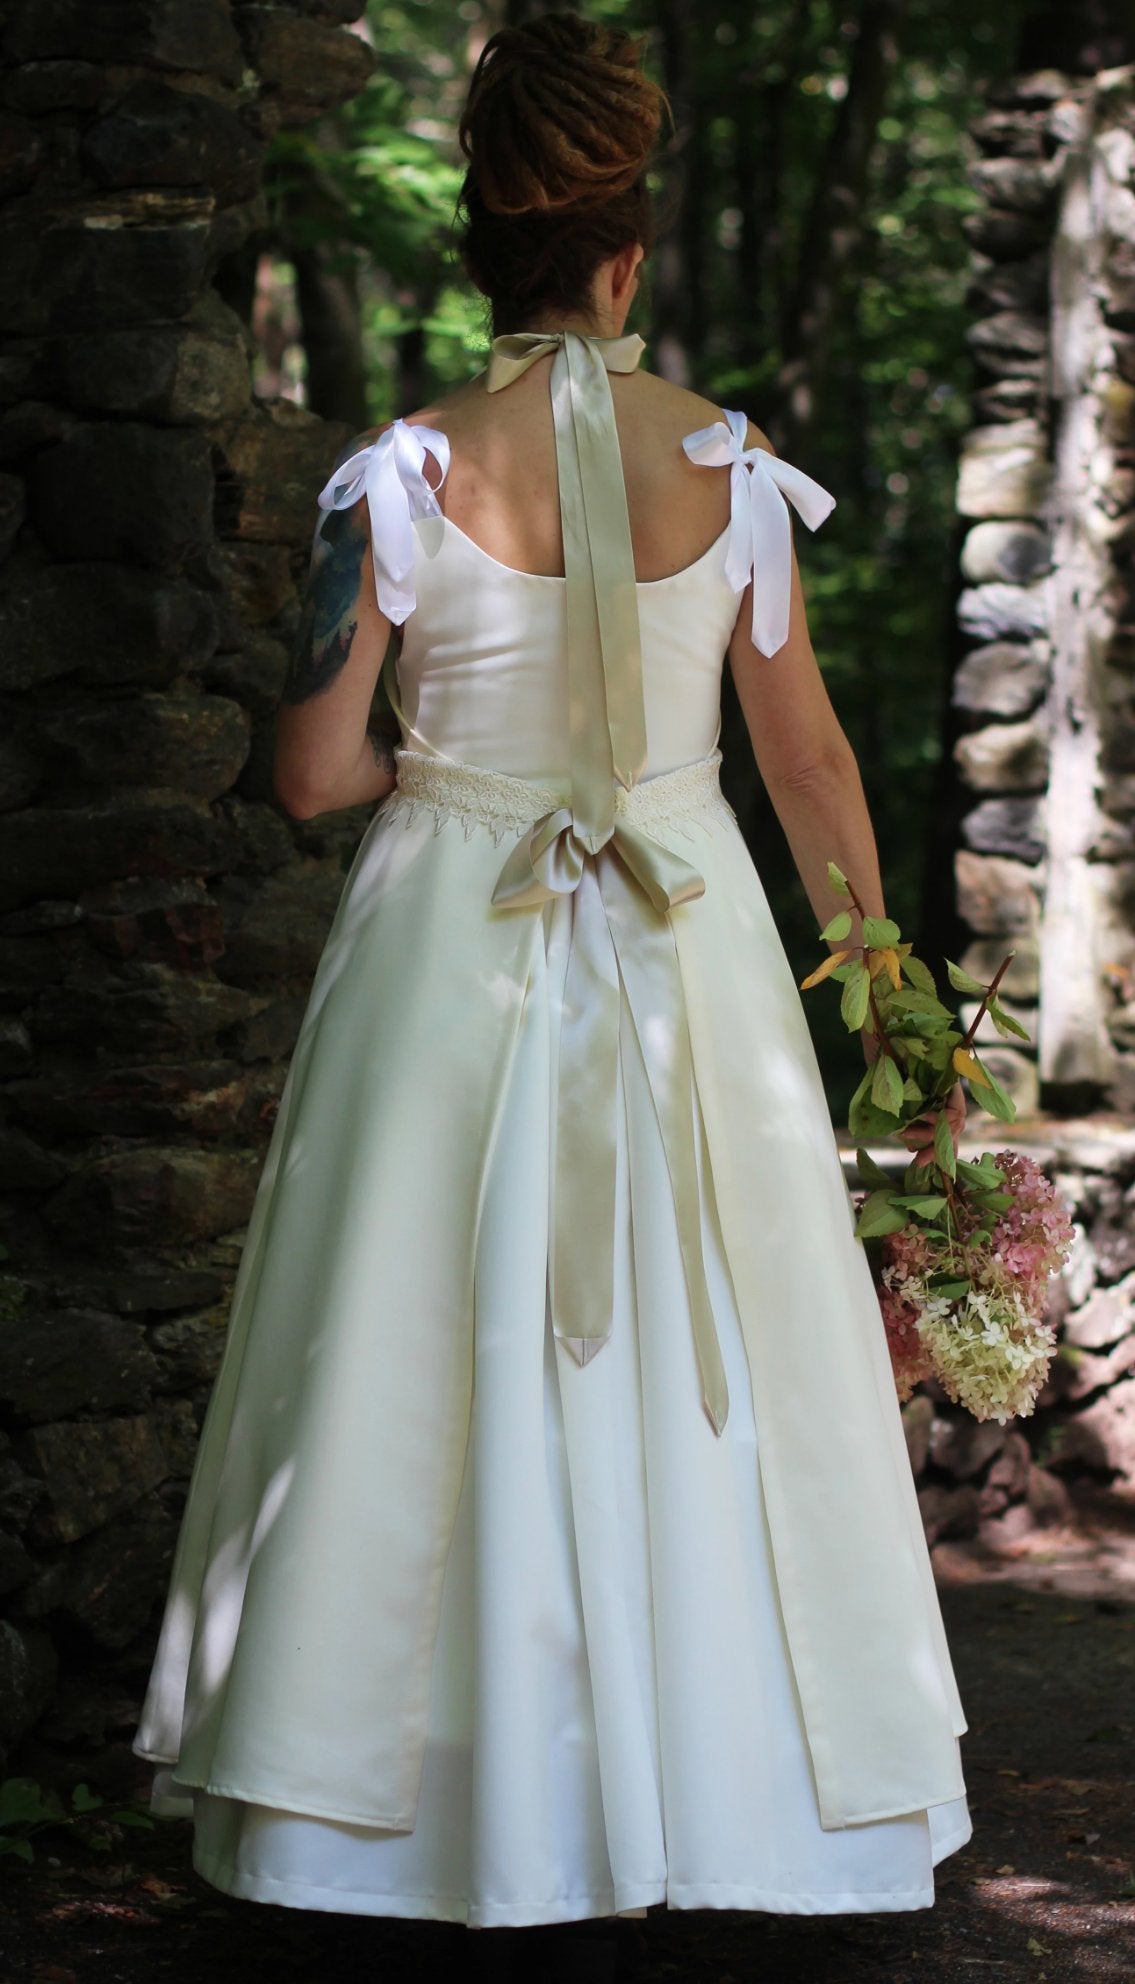 Bridal Apron with Empire Waist - Back view